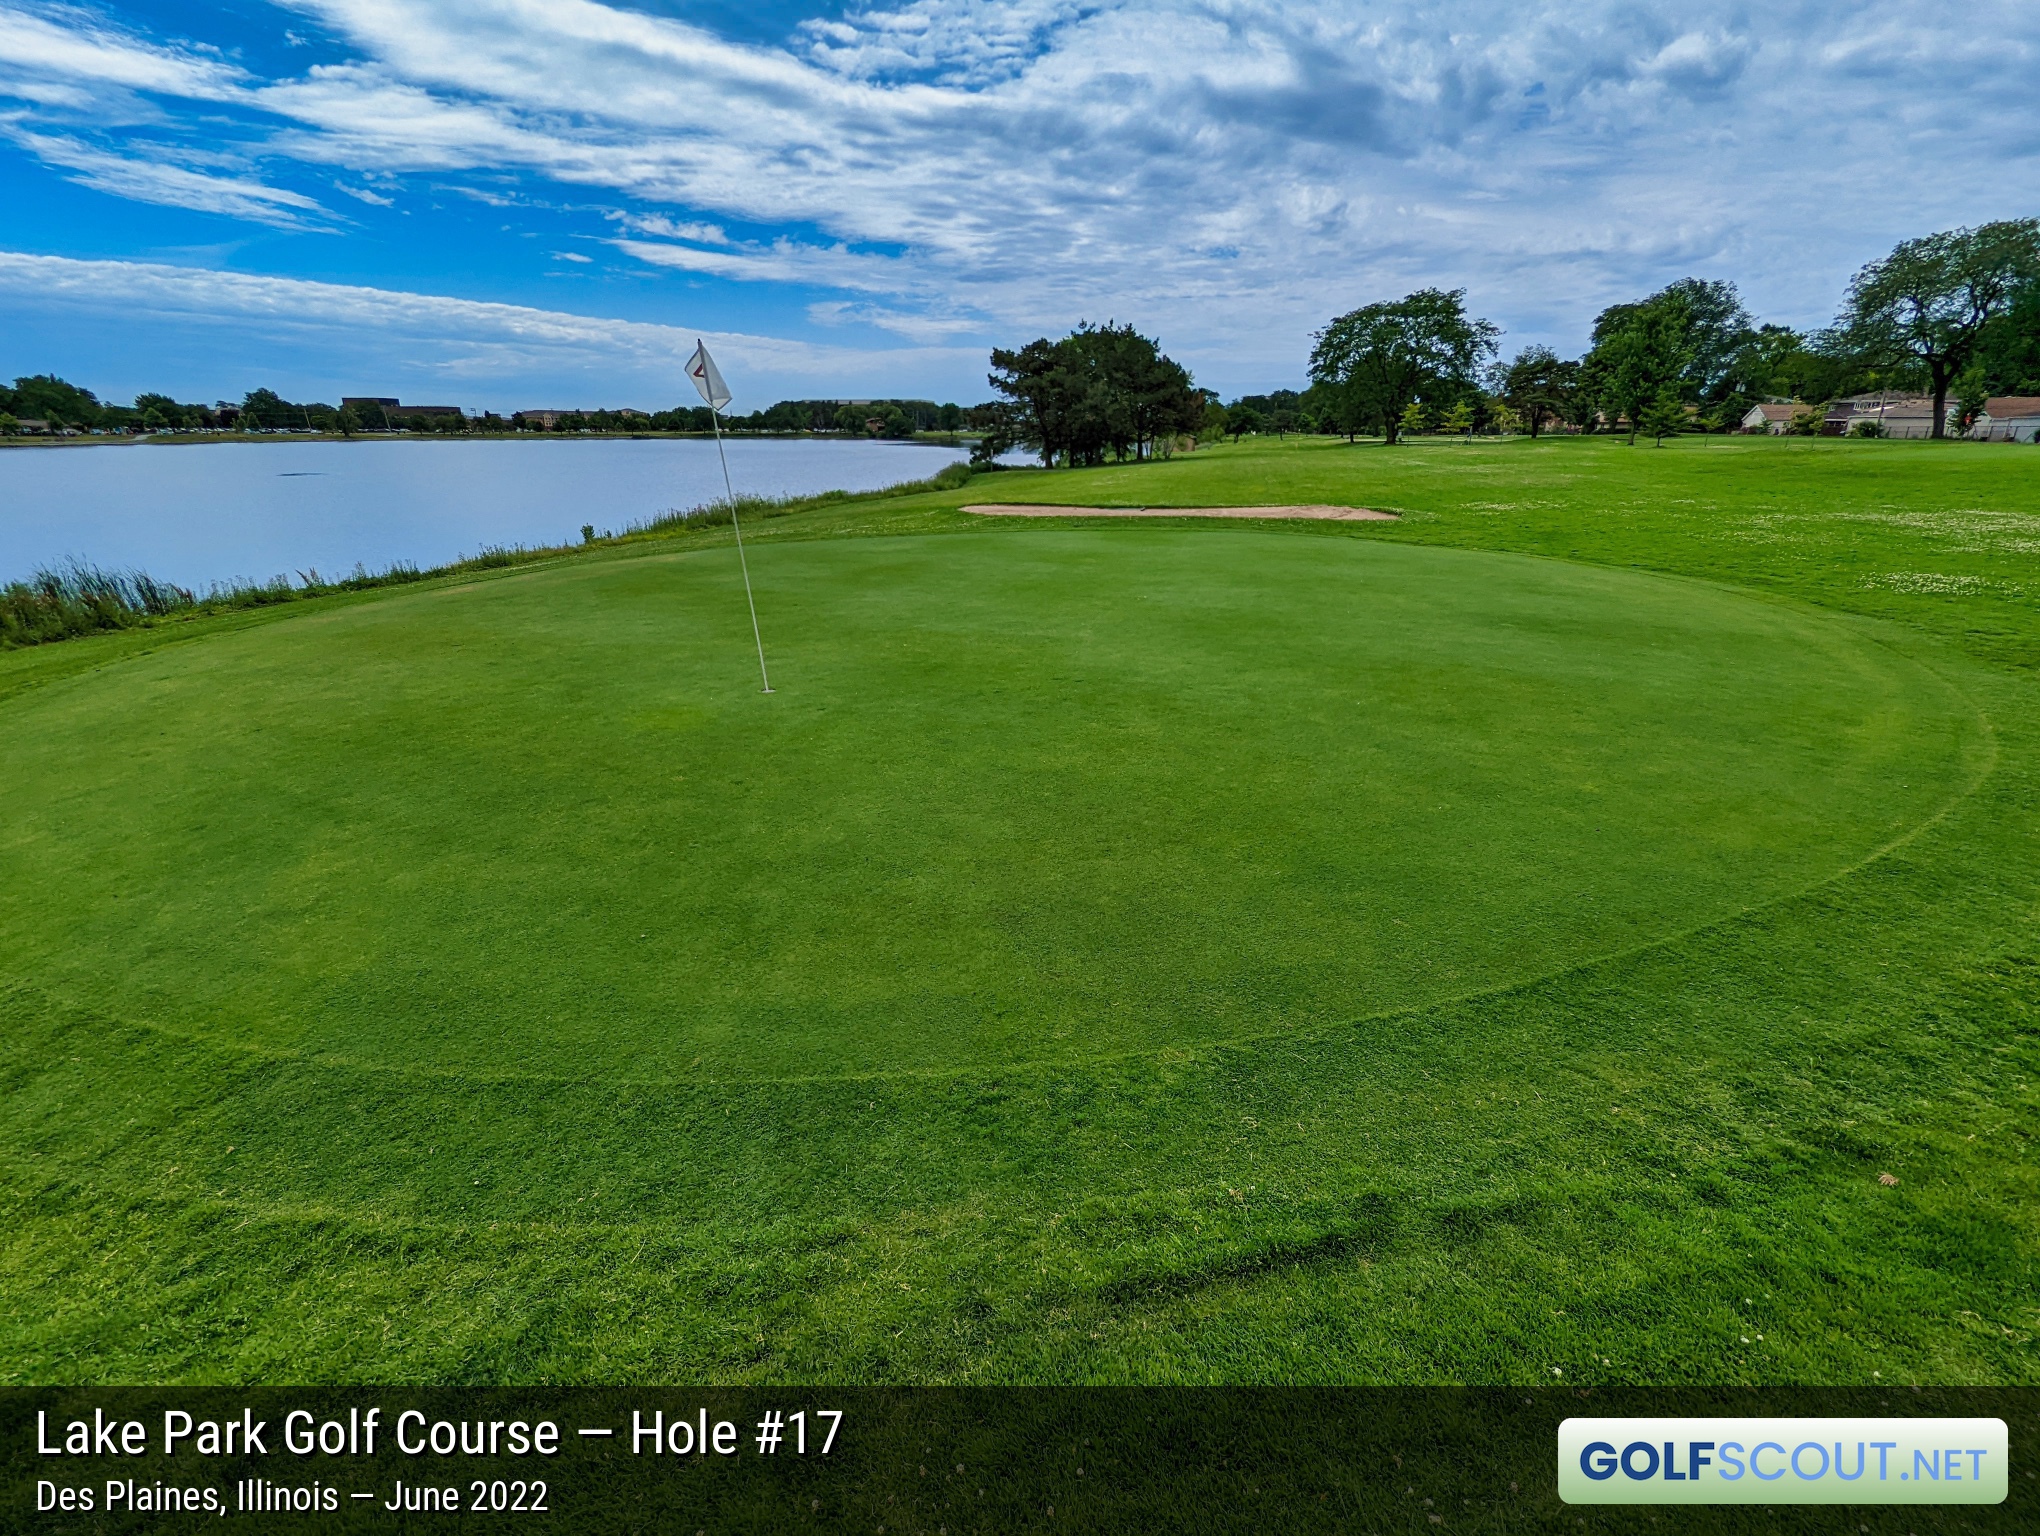 Photo of hole #17 at Lake Park Golf Course in Des Plaines, Illinois. 